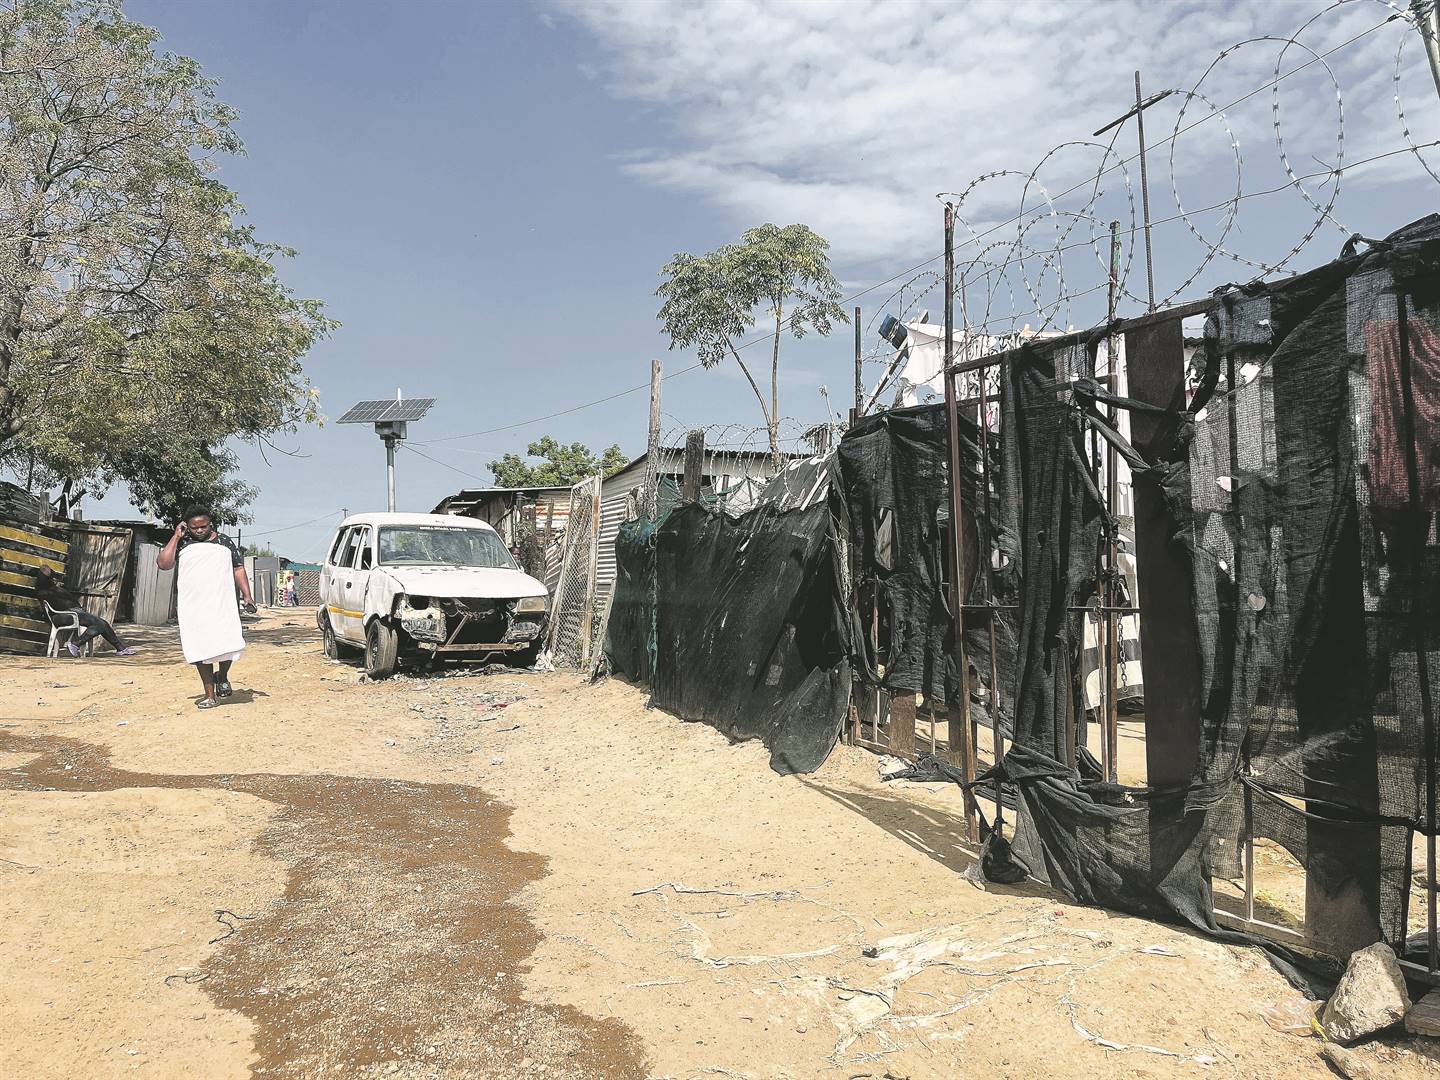 News24 | Diepsloot: A neglected community under siege by crime 